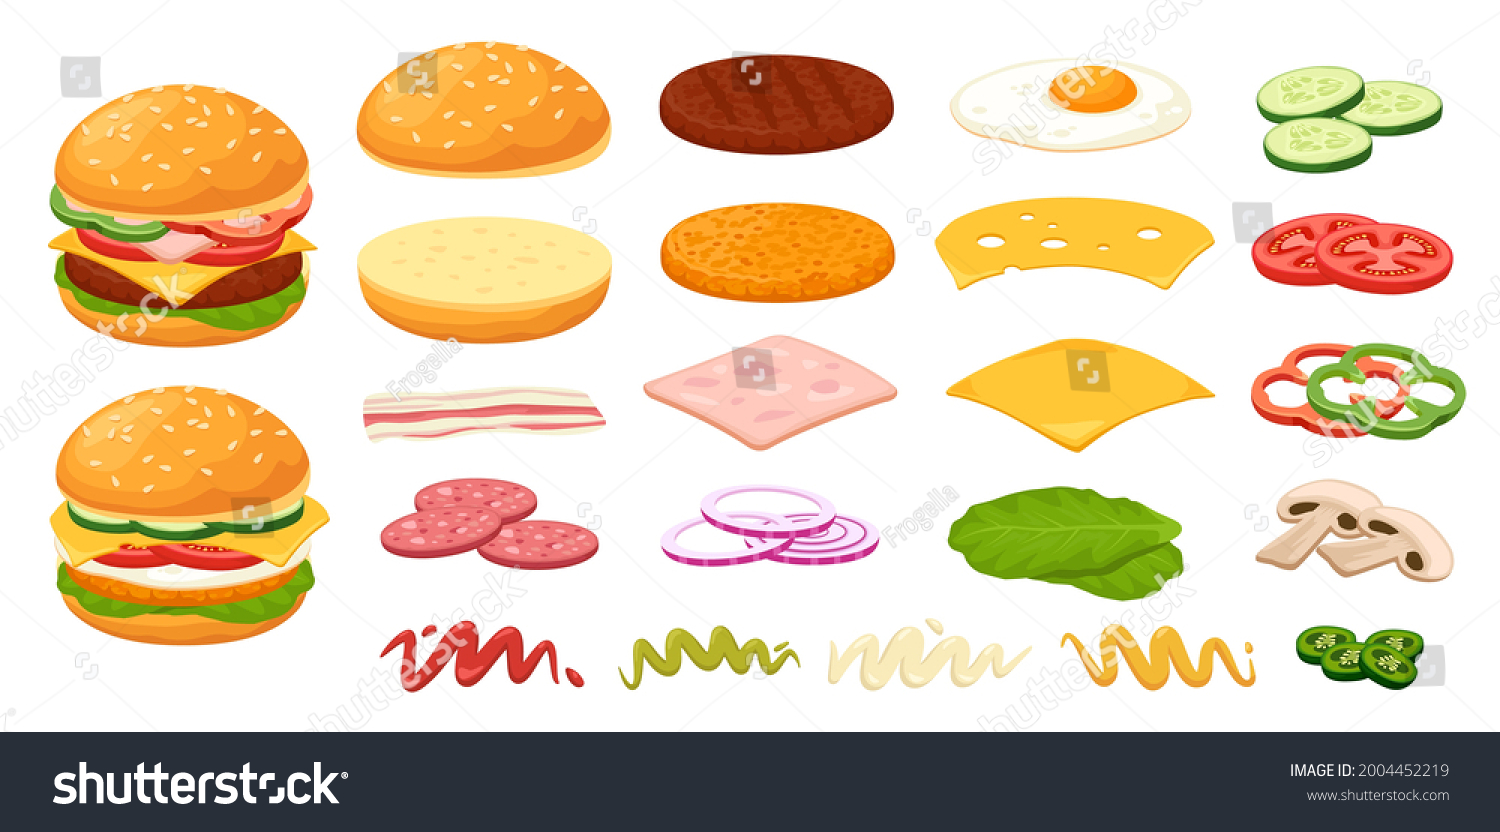 SVG of Cartoon burger ingredients. Bun, cheese, roasted egg, pickle, sliced tomato, onion. Fast food burgers constructor, sandwich ingredient vector set. American lunch, meat and vegetables svg